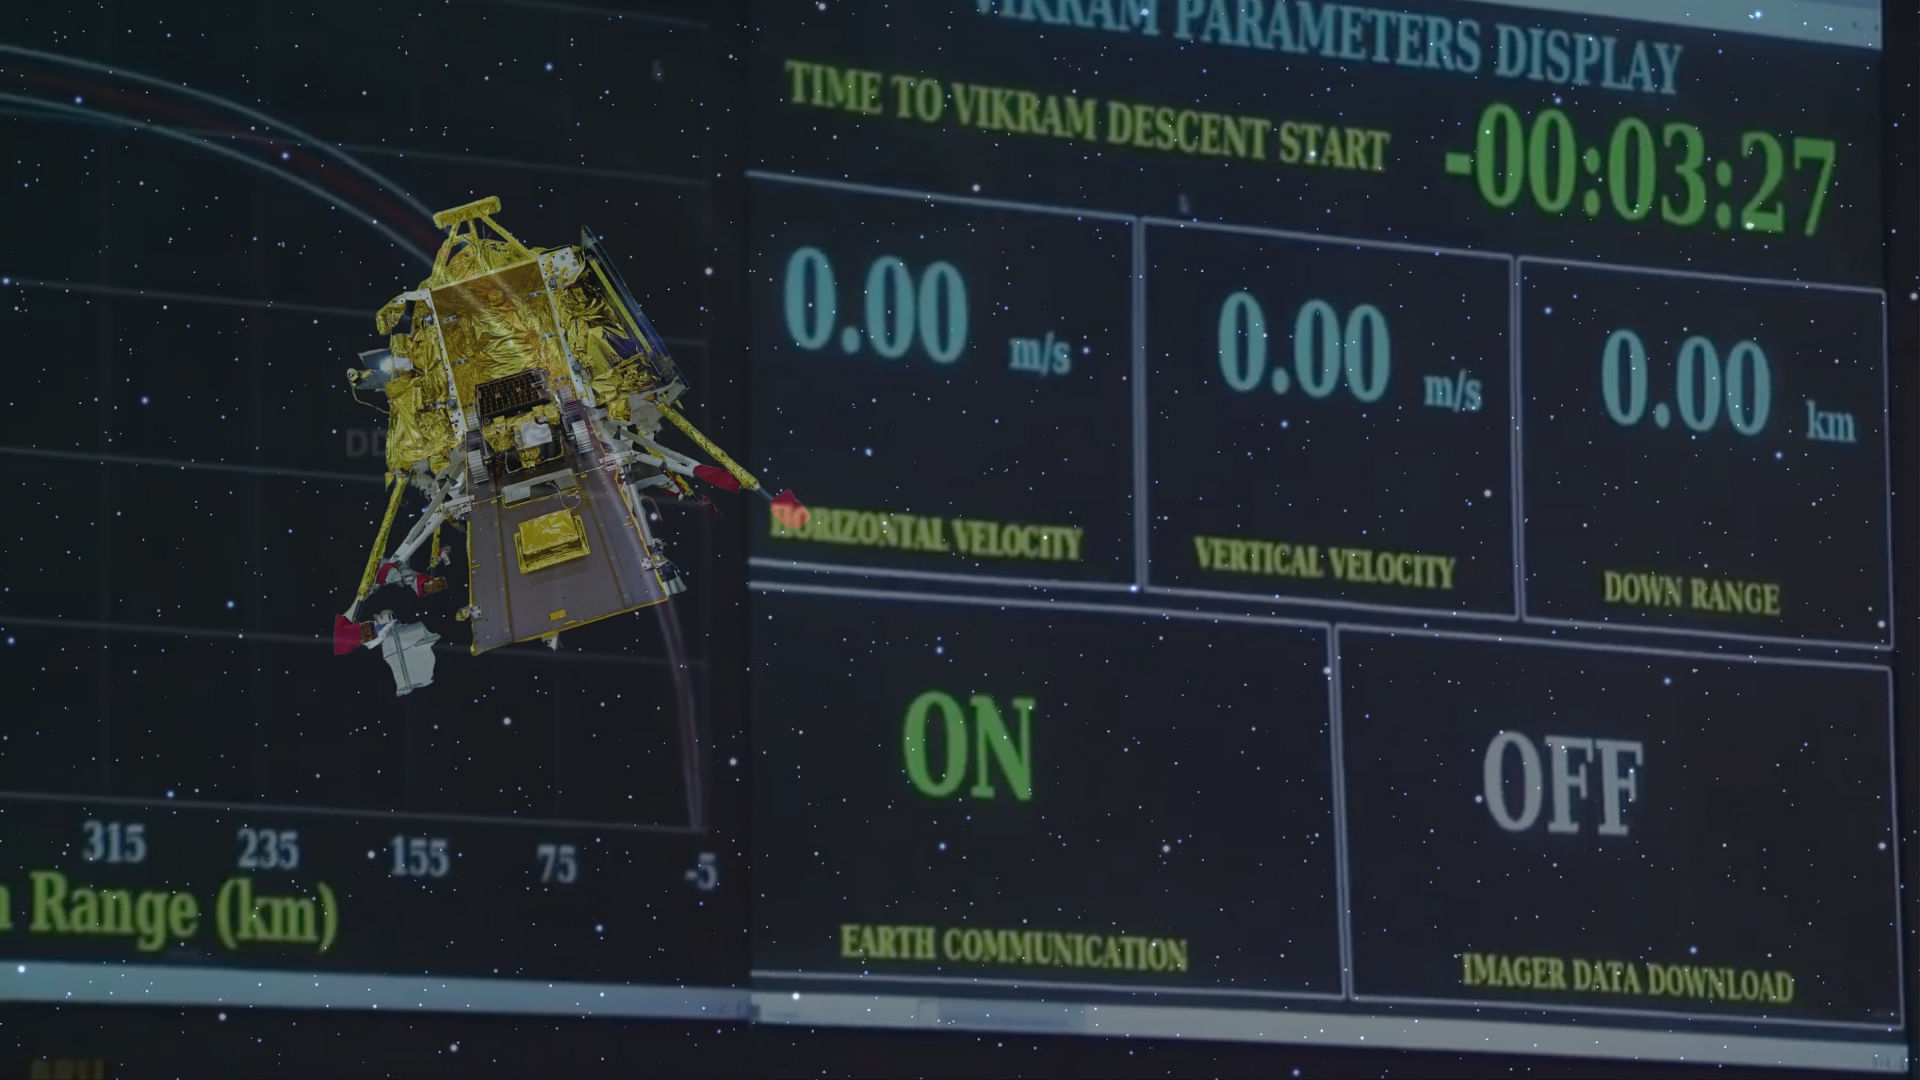 Communication was lost with Vikram Lander of the Chandrayaan-2 mission when it was just 2.1 km from the surface of the Moon.